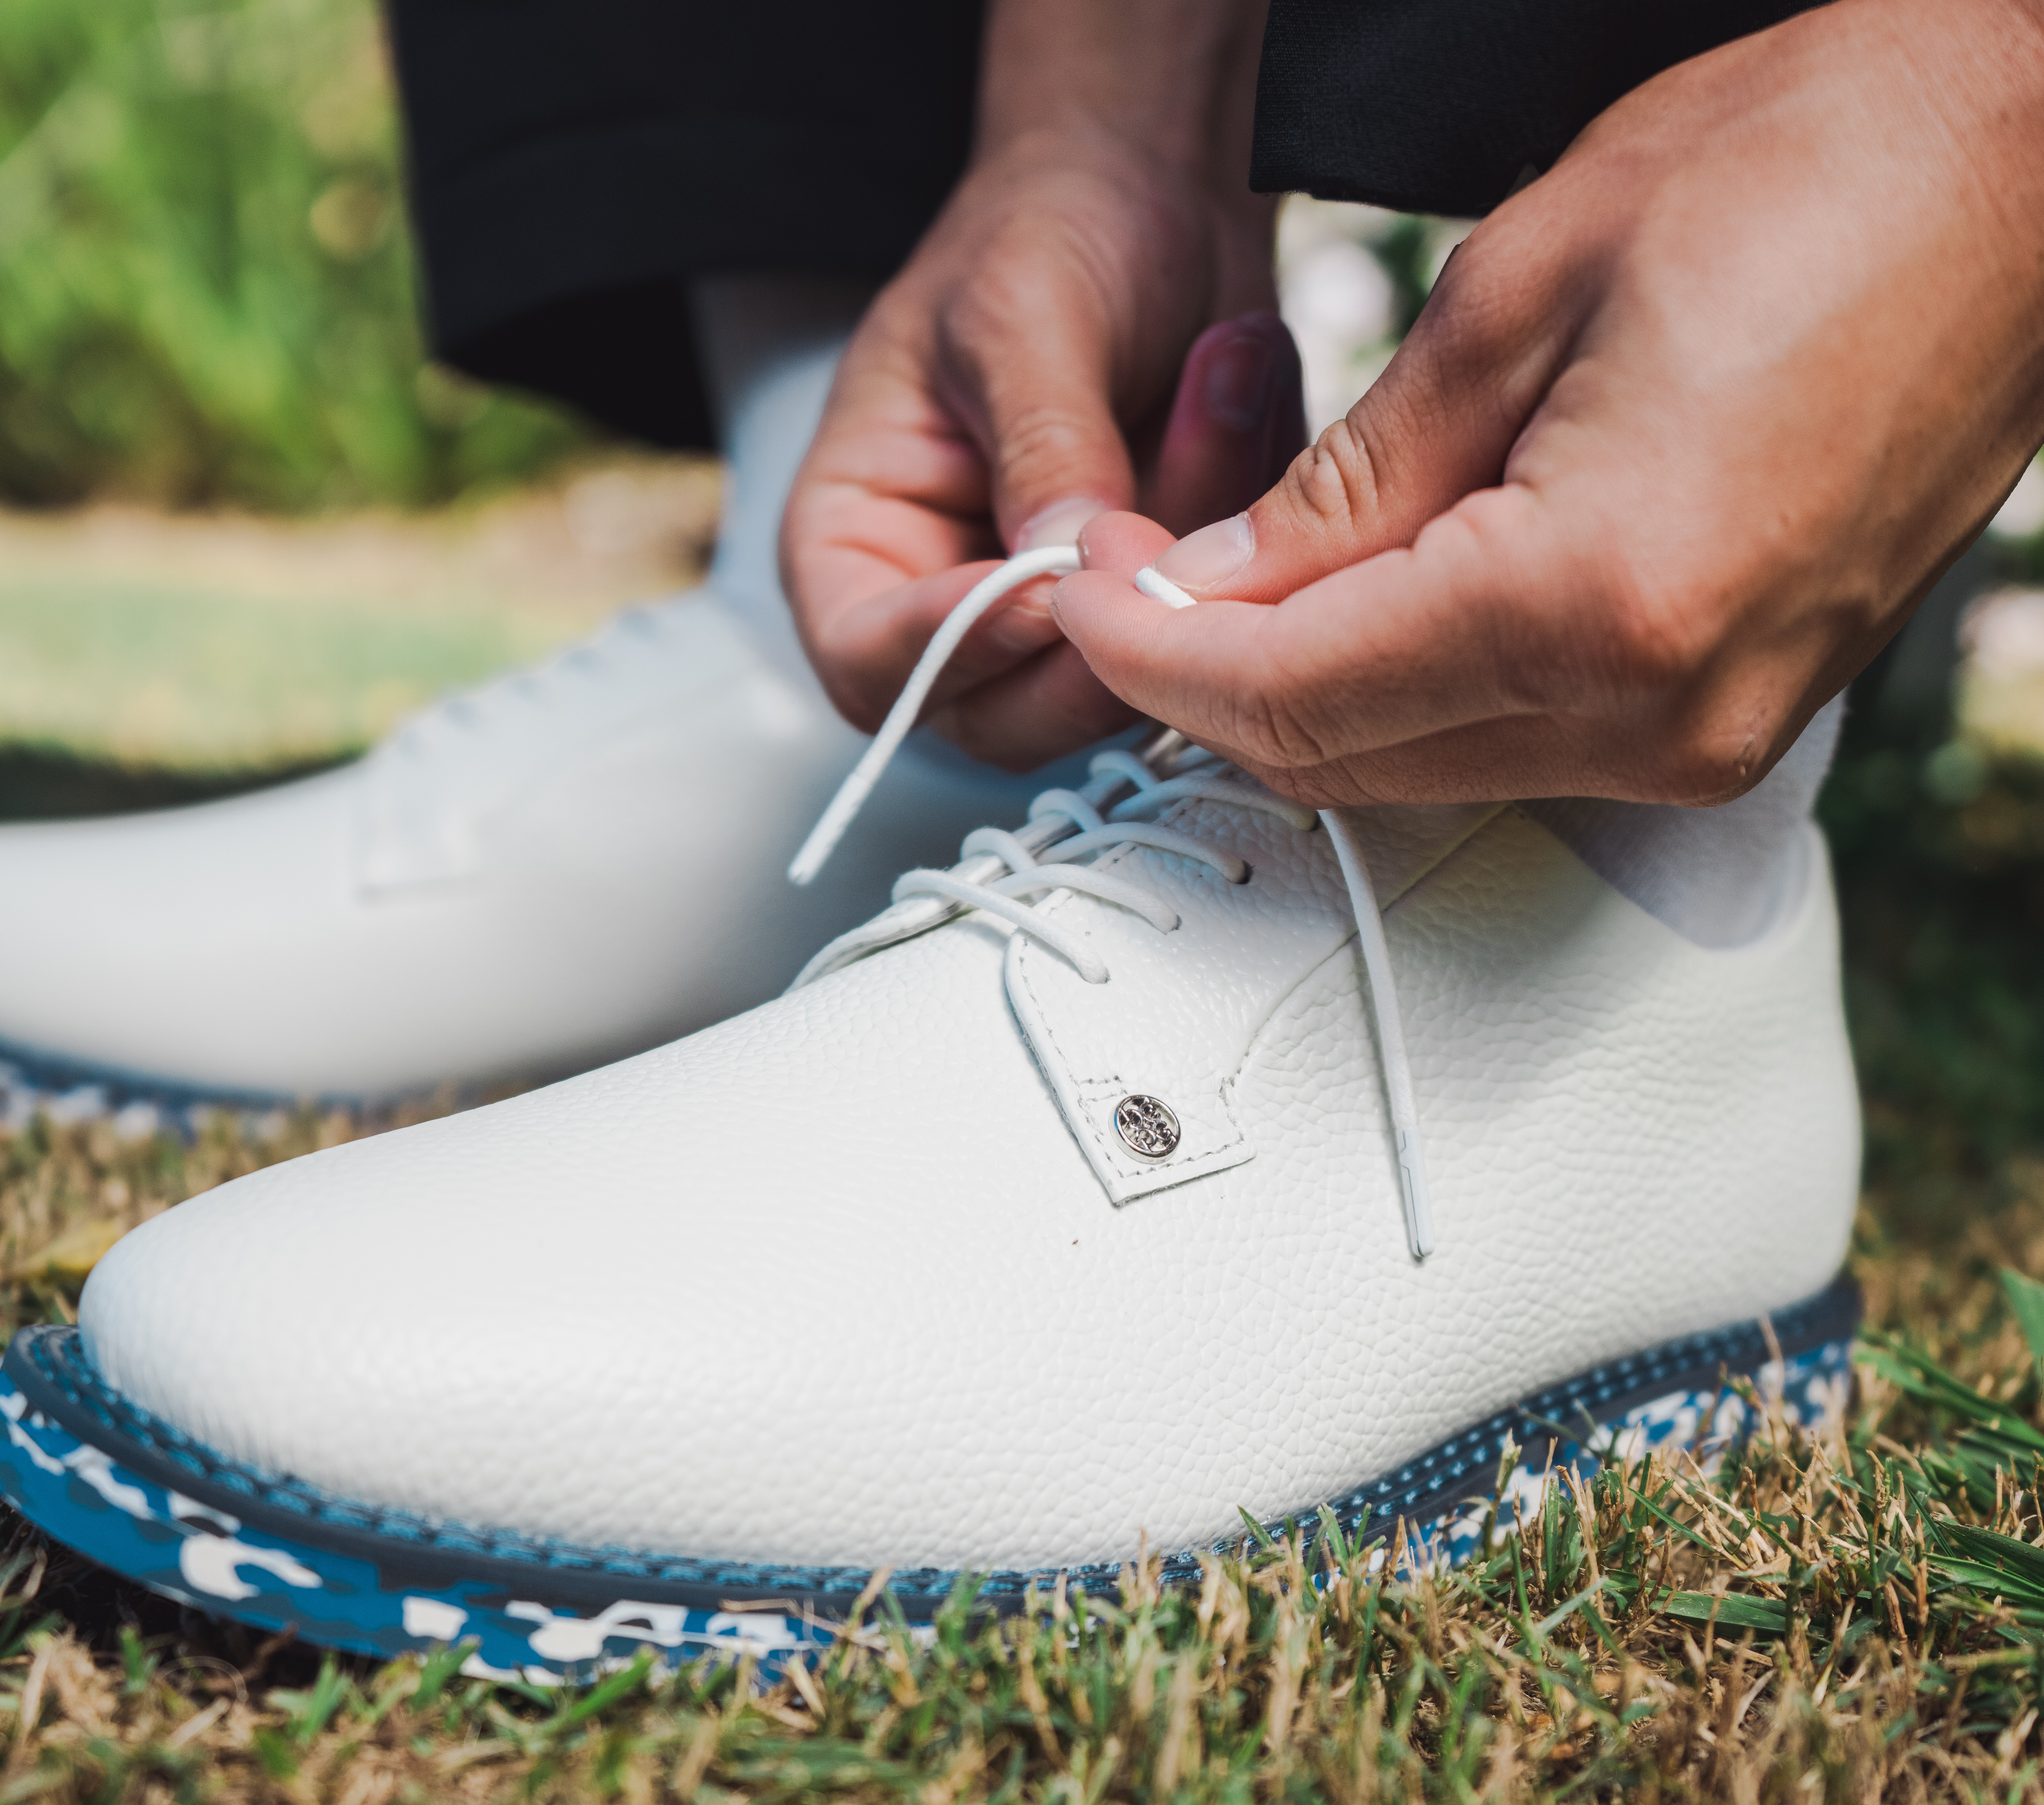 TaylorMade, G/Fore shoe collab is awesome – GolfWRX